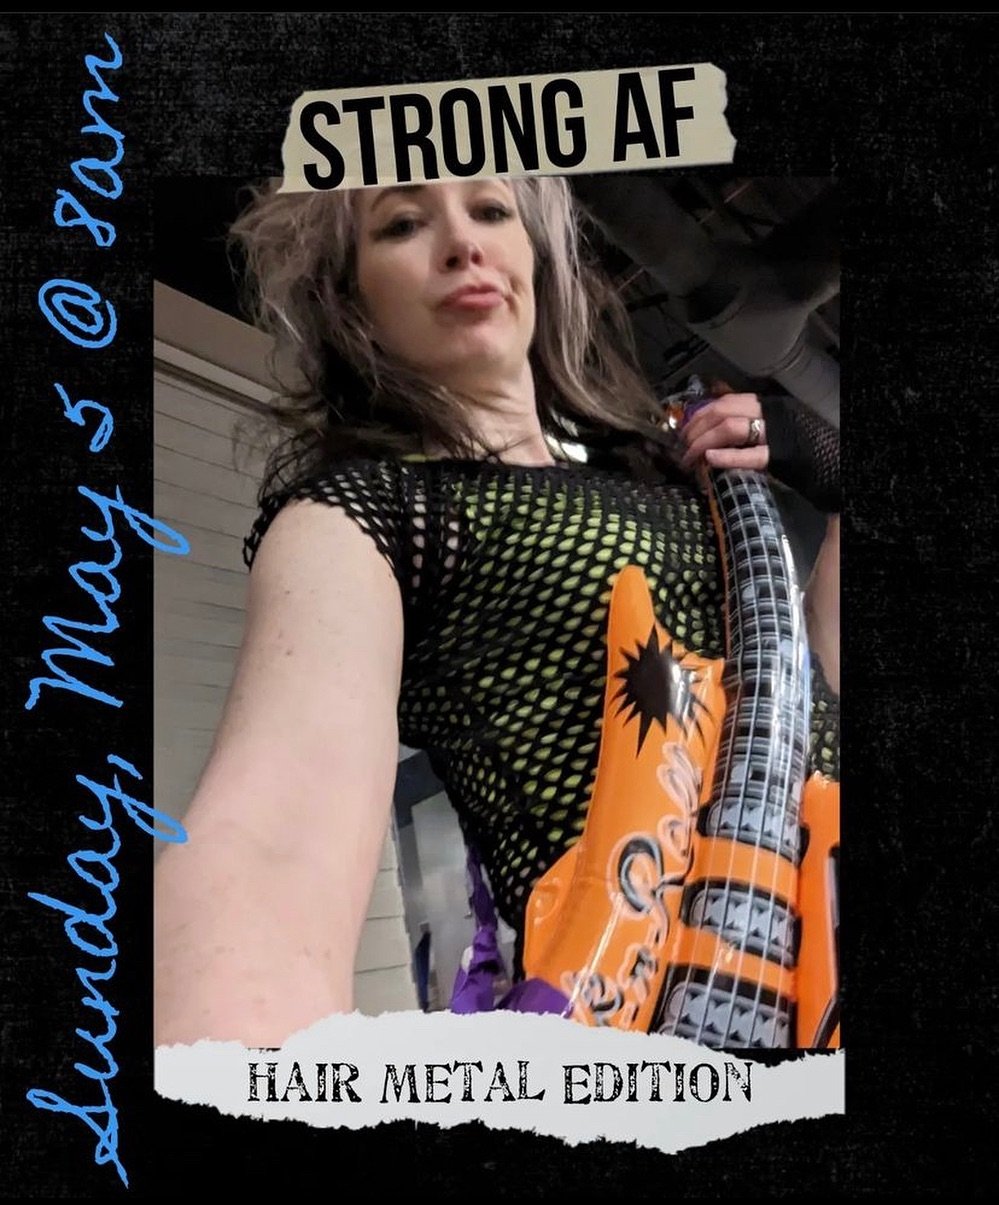 @youplusmefitness is running a hair metal class for Strong AF this week. Always high energy and a great workout.

Pair it with Run/Walk Club for best results!

https://api.hellowalla.com/previews/701921?b=98&amp;type=class